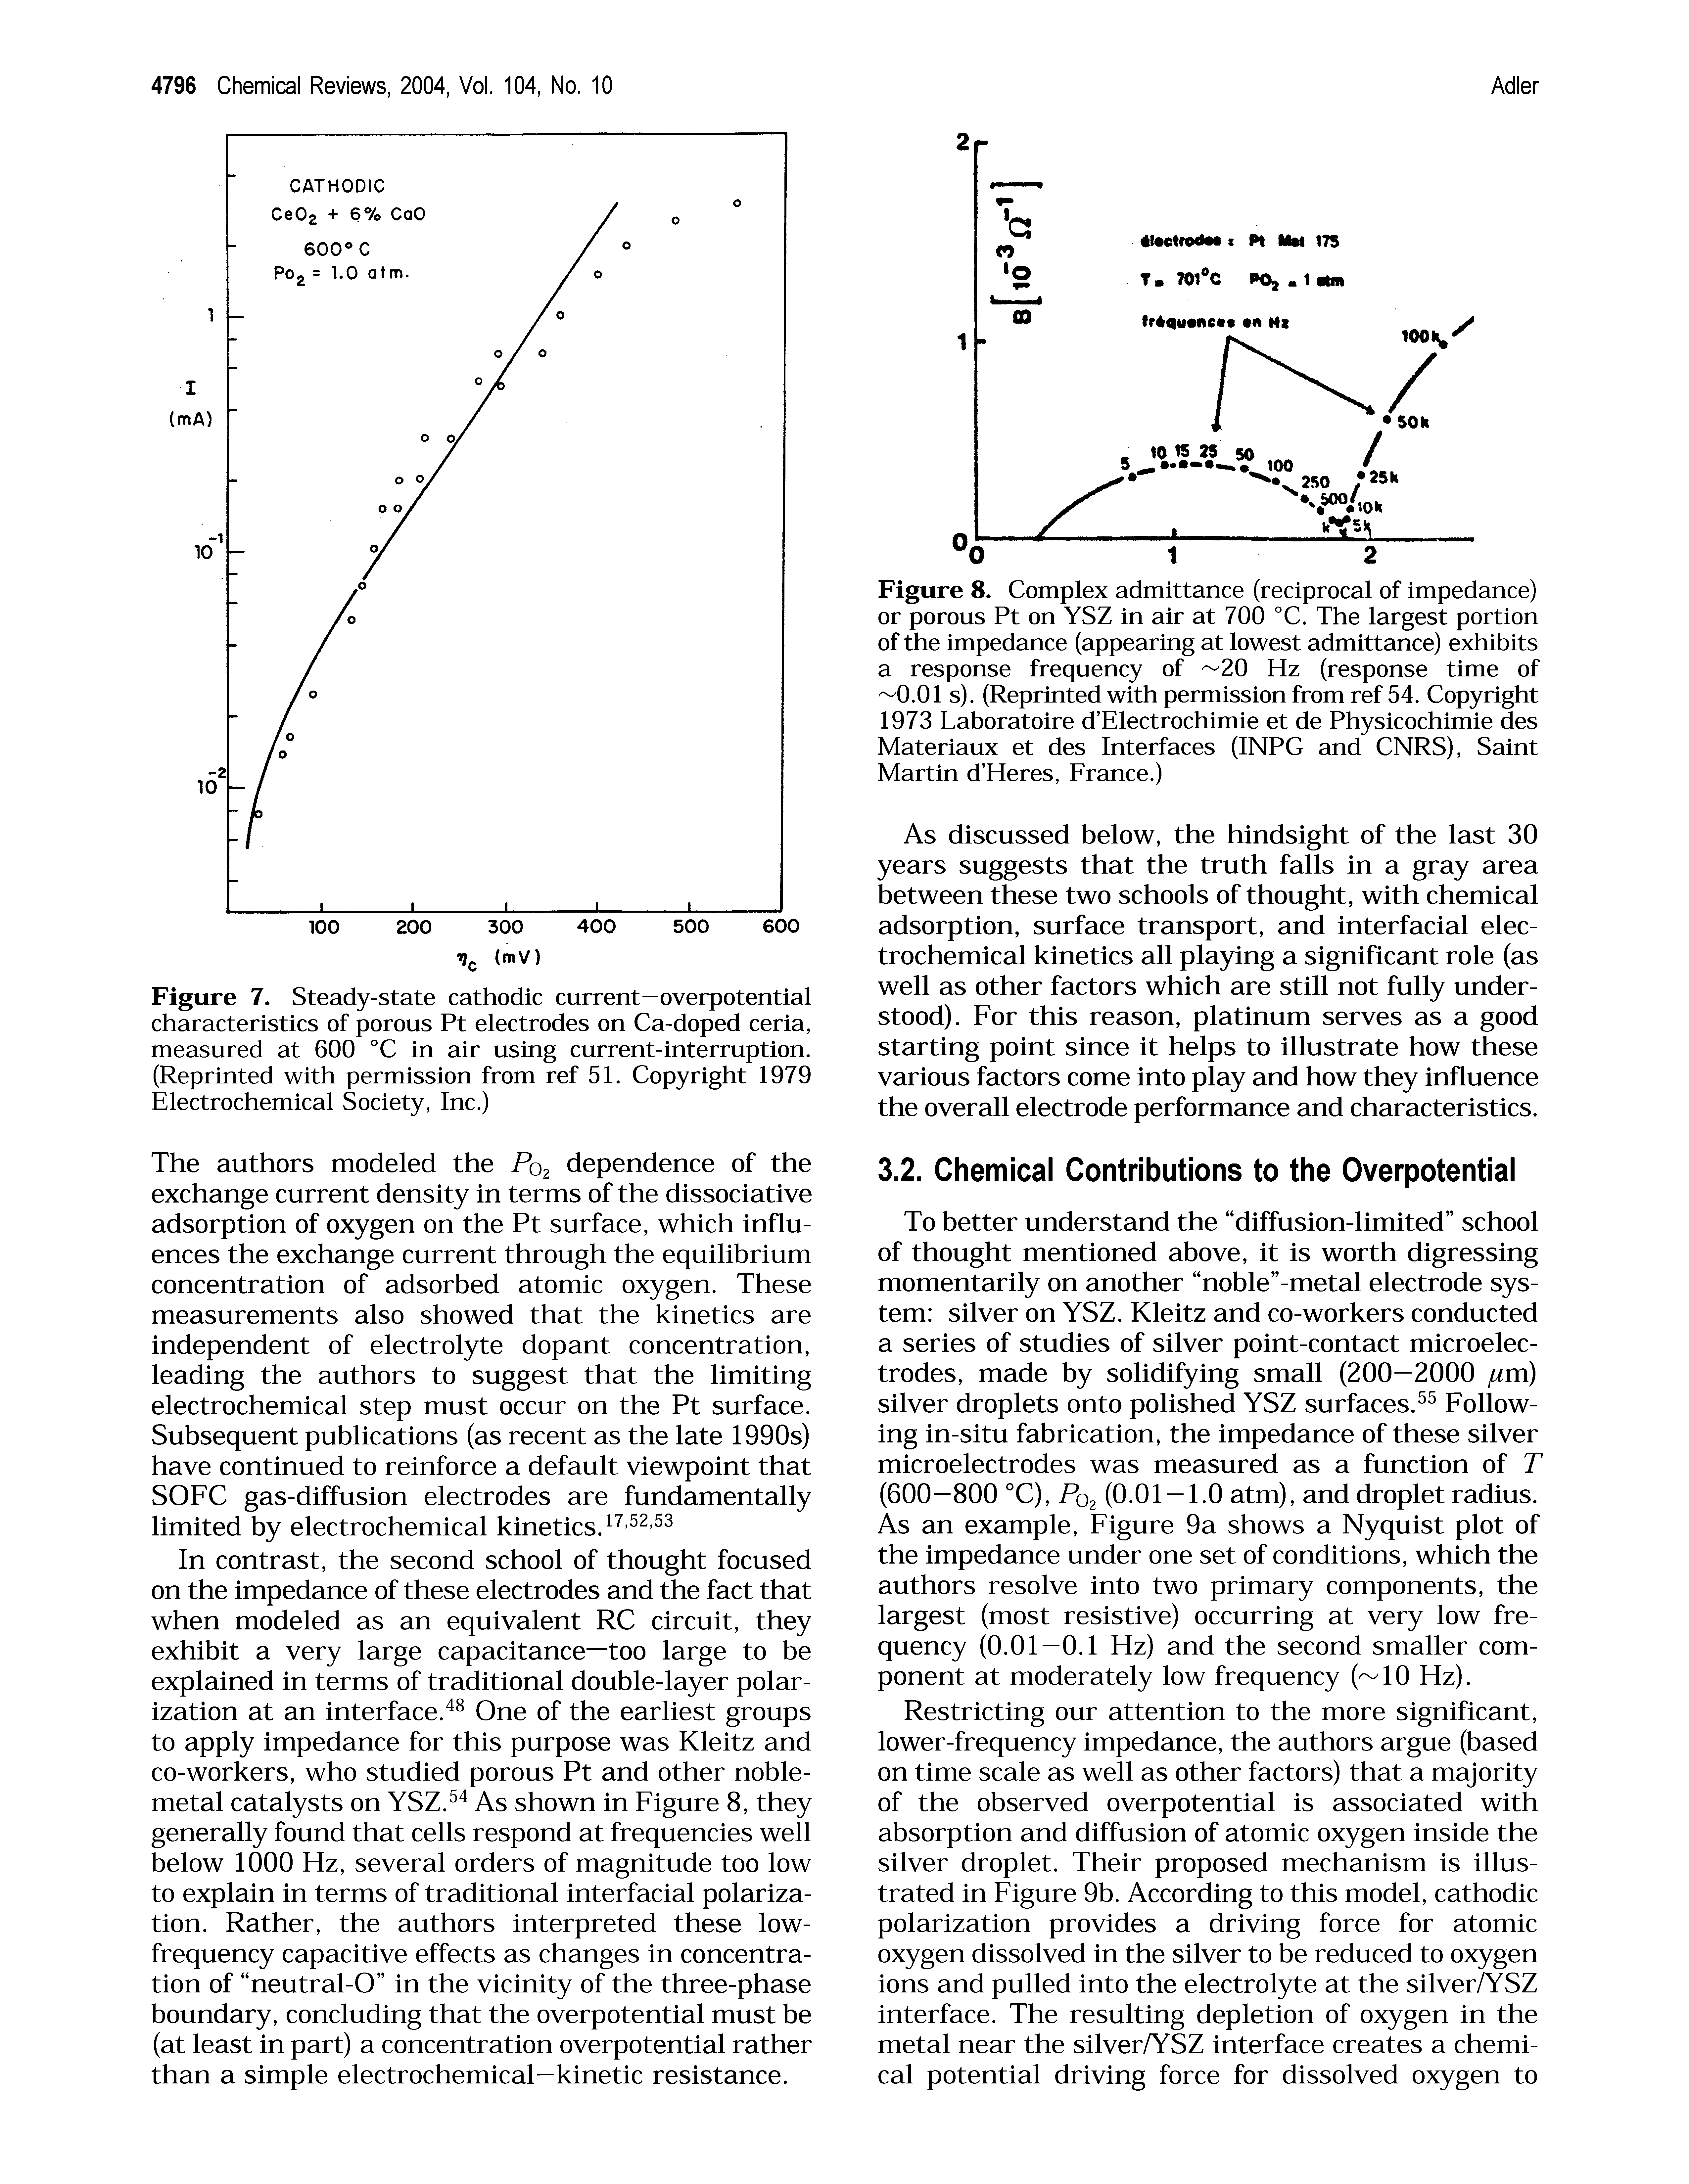 Figure 8. Complex admittance (reciprocal of impedance) or porous Pt on YSZ in air at 700 °C. The largest portion of the impedance (appearing at lowest admittance) exhibits a response frequency of 20 Hz (response time of 0.01 s). (Reprinted with permission from ref 54. Copyright 1973 Laboratoire d Electrochimie et de Physicochimie des Materiaux et des Interfaces (INPG and CNRS), Saint Martin d Heres, France.)...